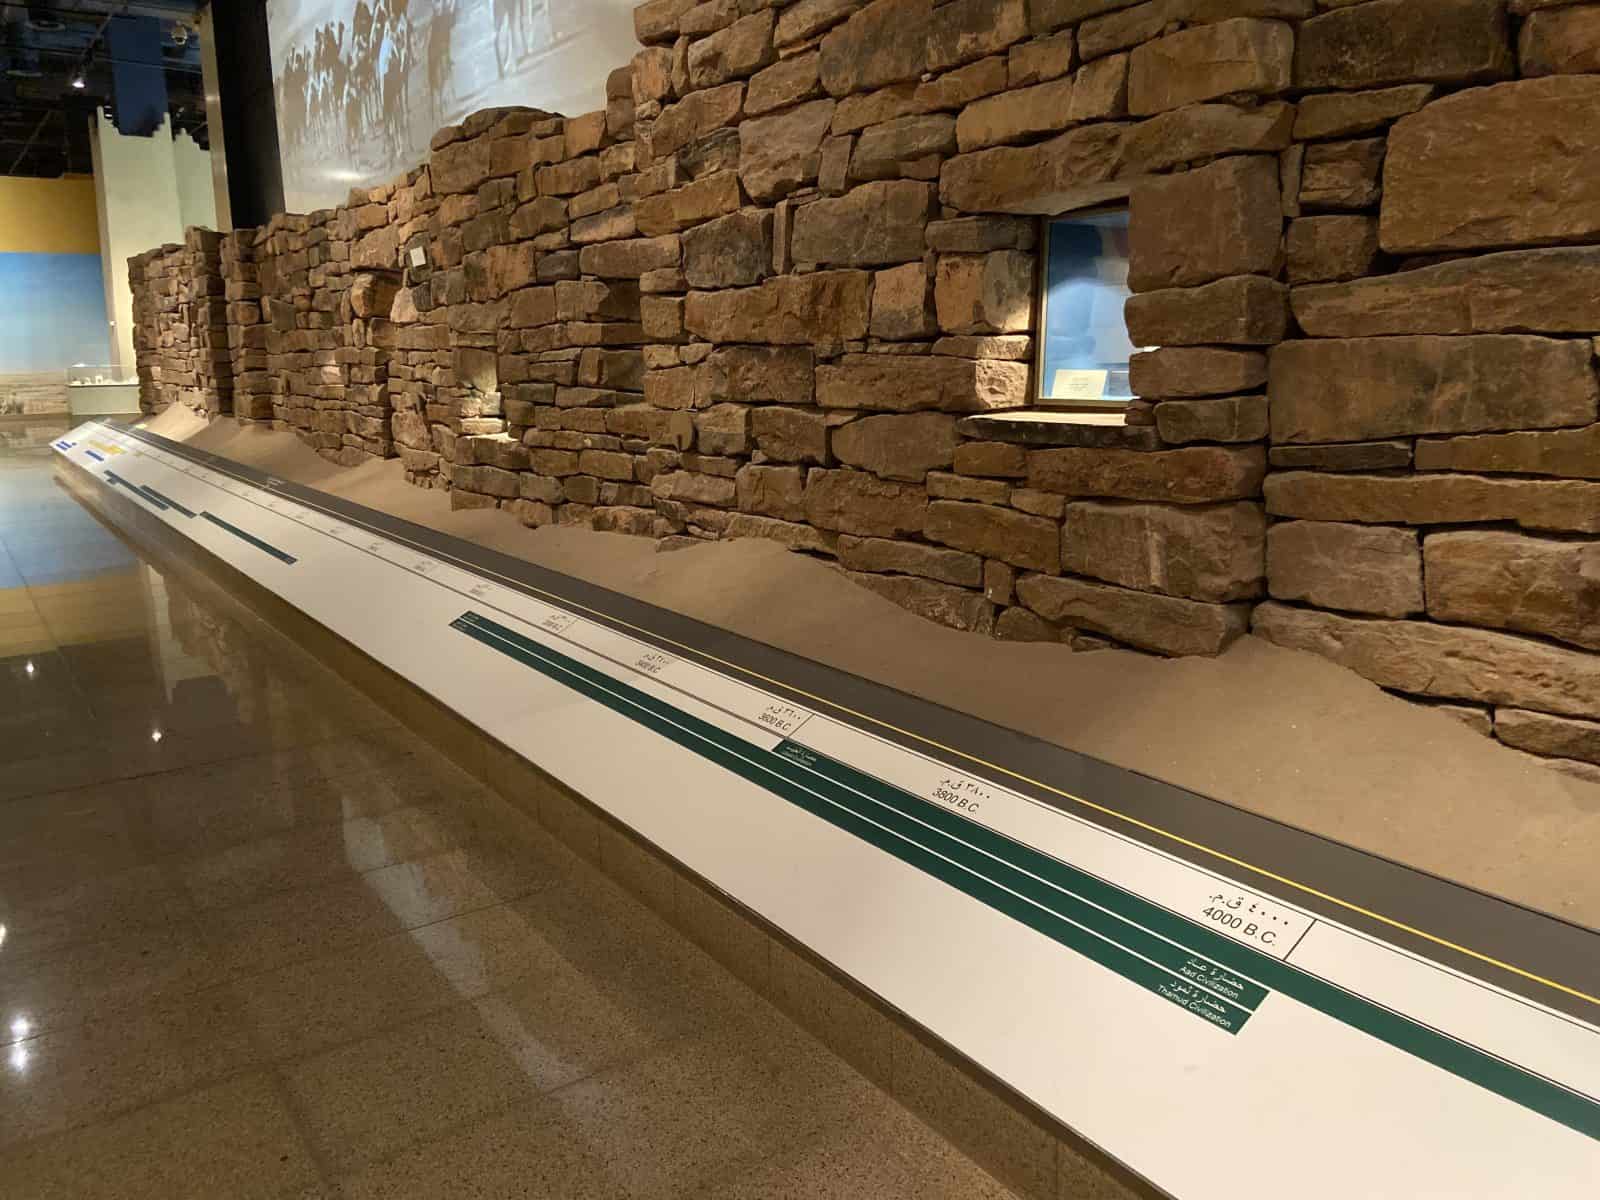 A display showing the evolution of Saudi Arabia societies in the National Museum.